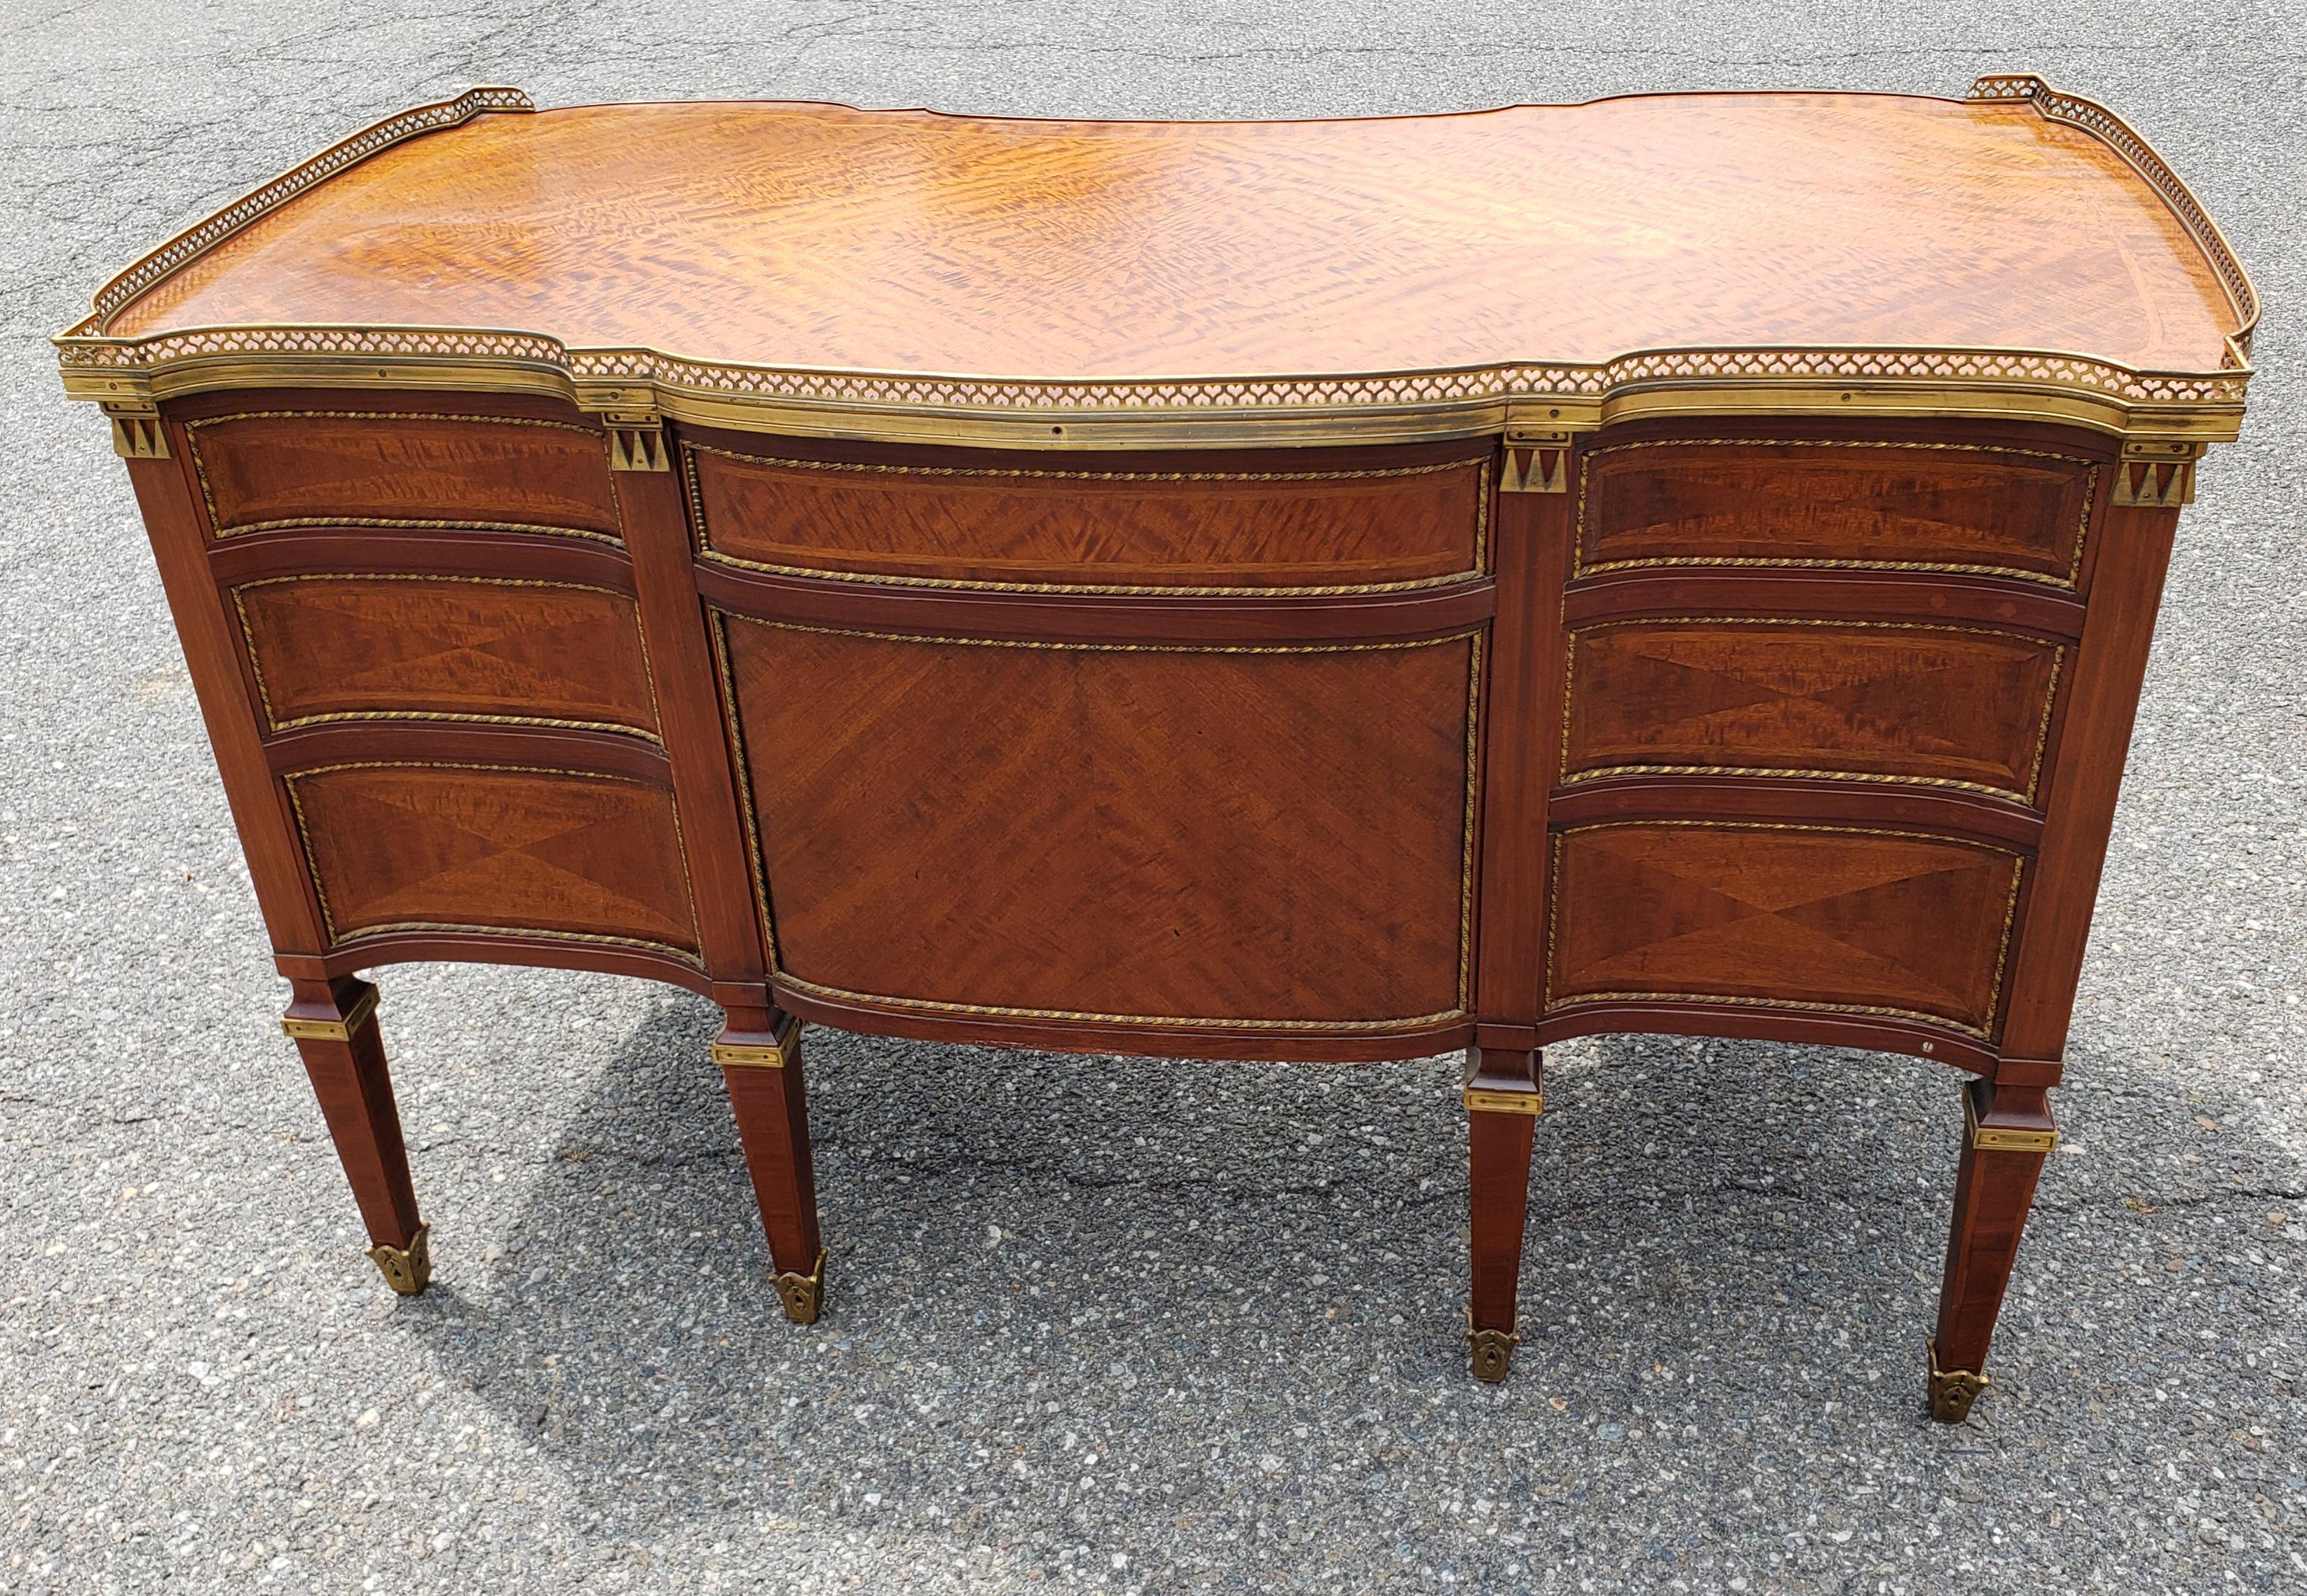 Louis XVI Style Ormolu Mounted Galleried Mahogany Burl and Marquetry Desk  For Sale 4